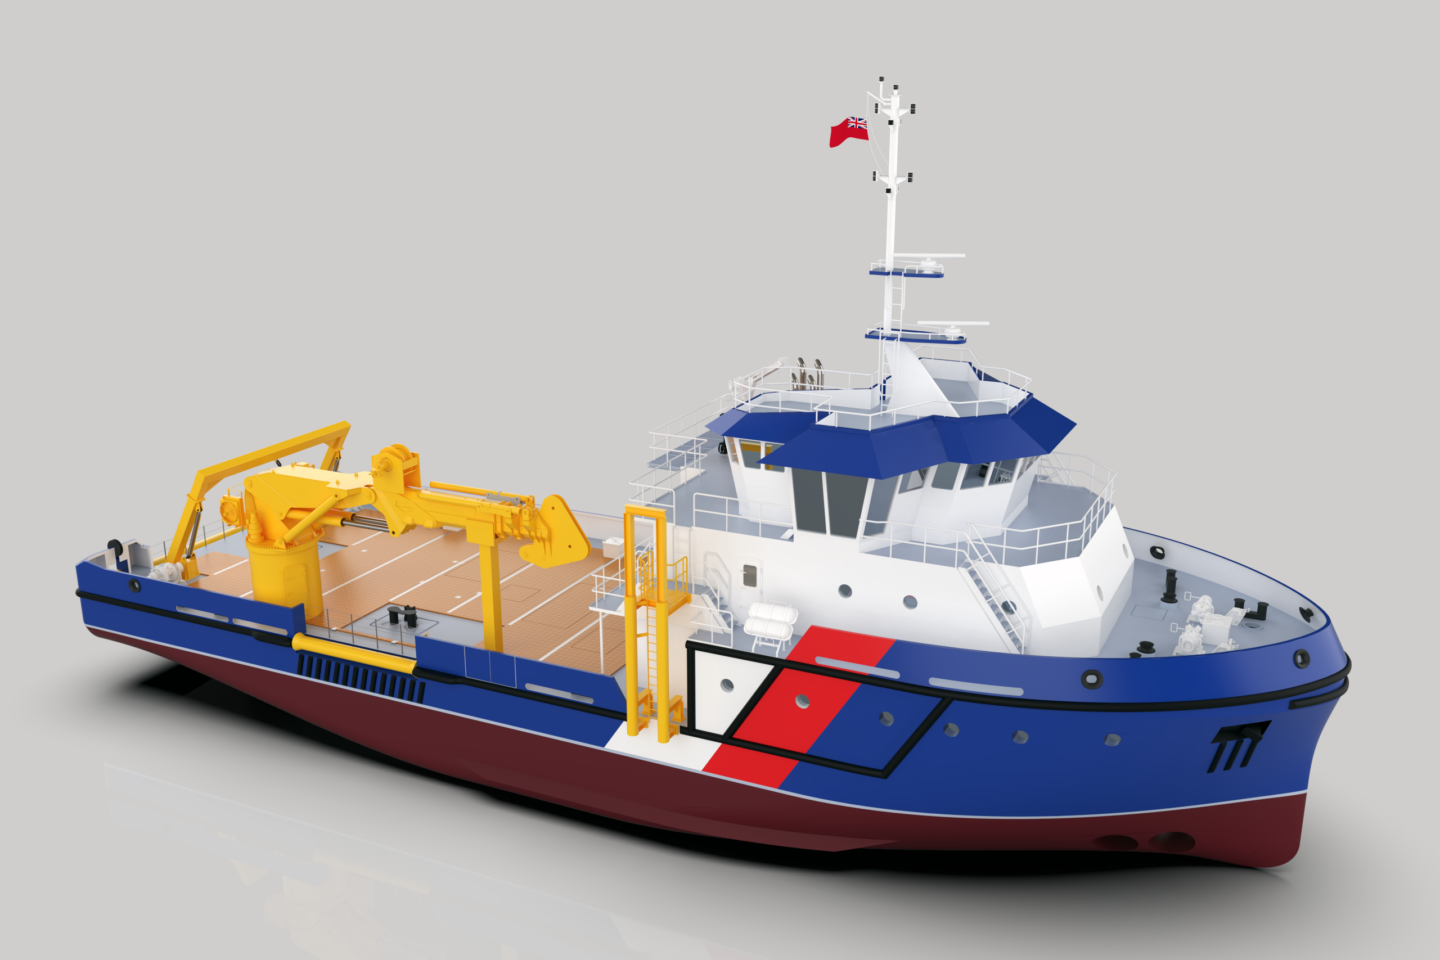 Briggs Marines newly commissioned Maintenance Support Vessel View